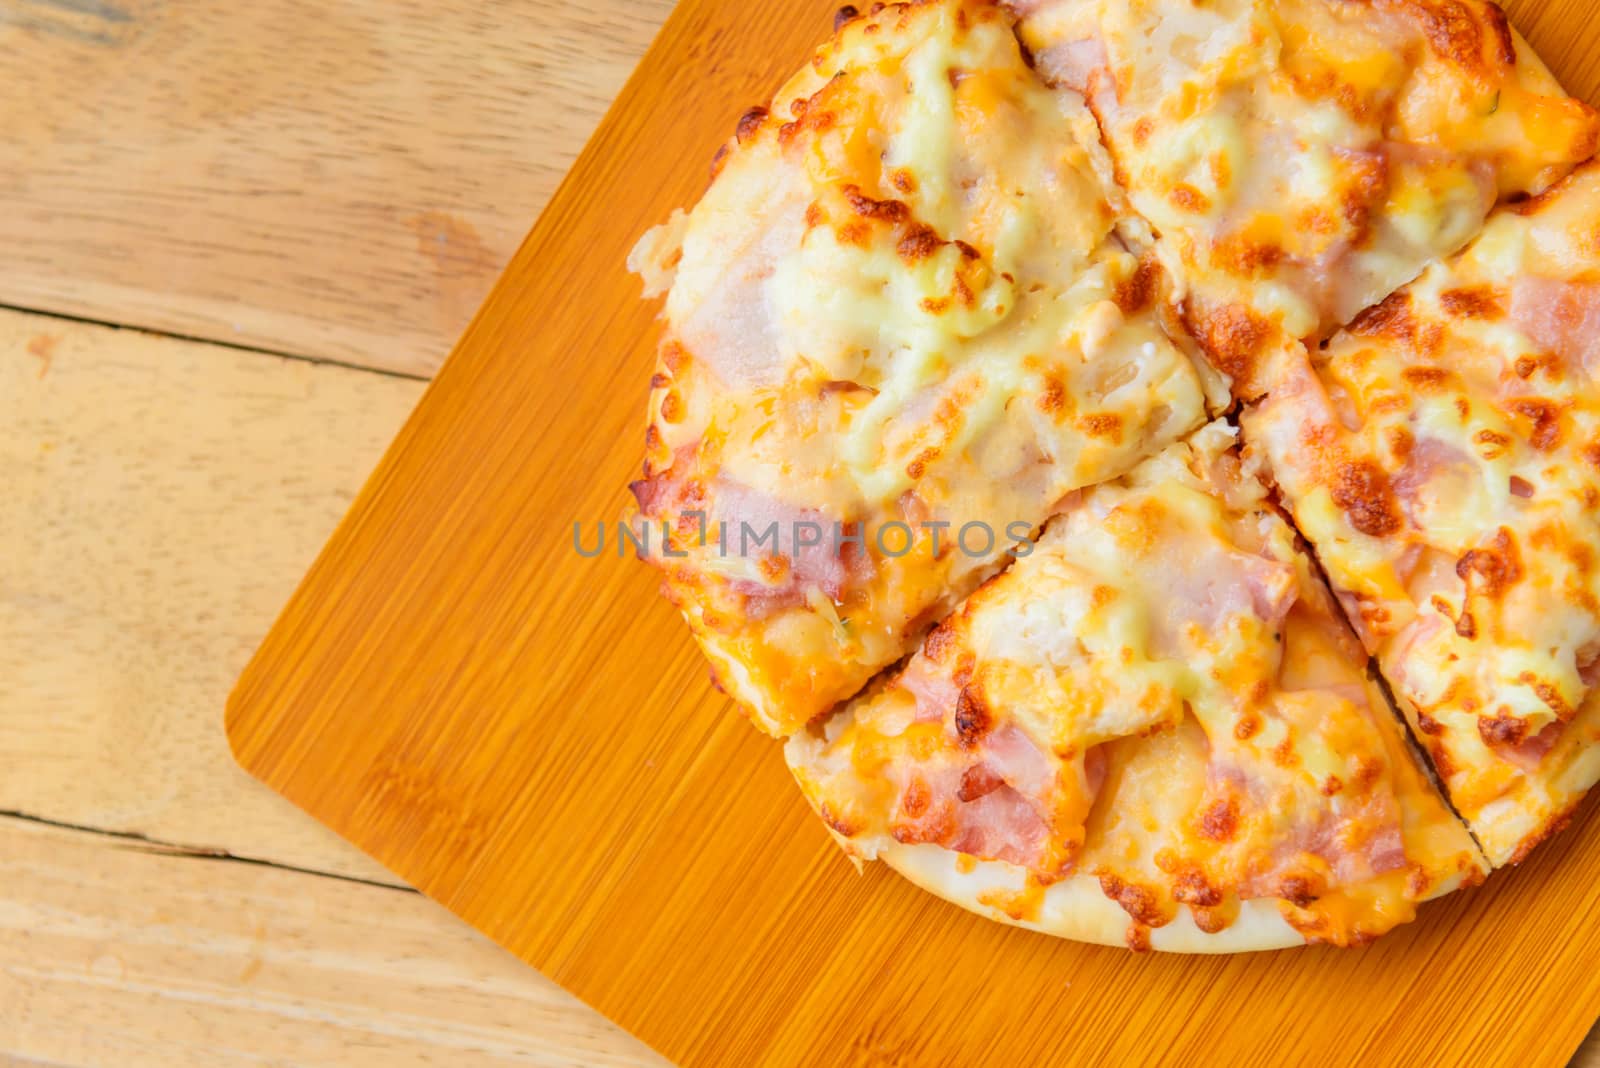 Home made pizza on wood plate by rukawajung